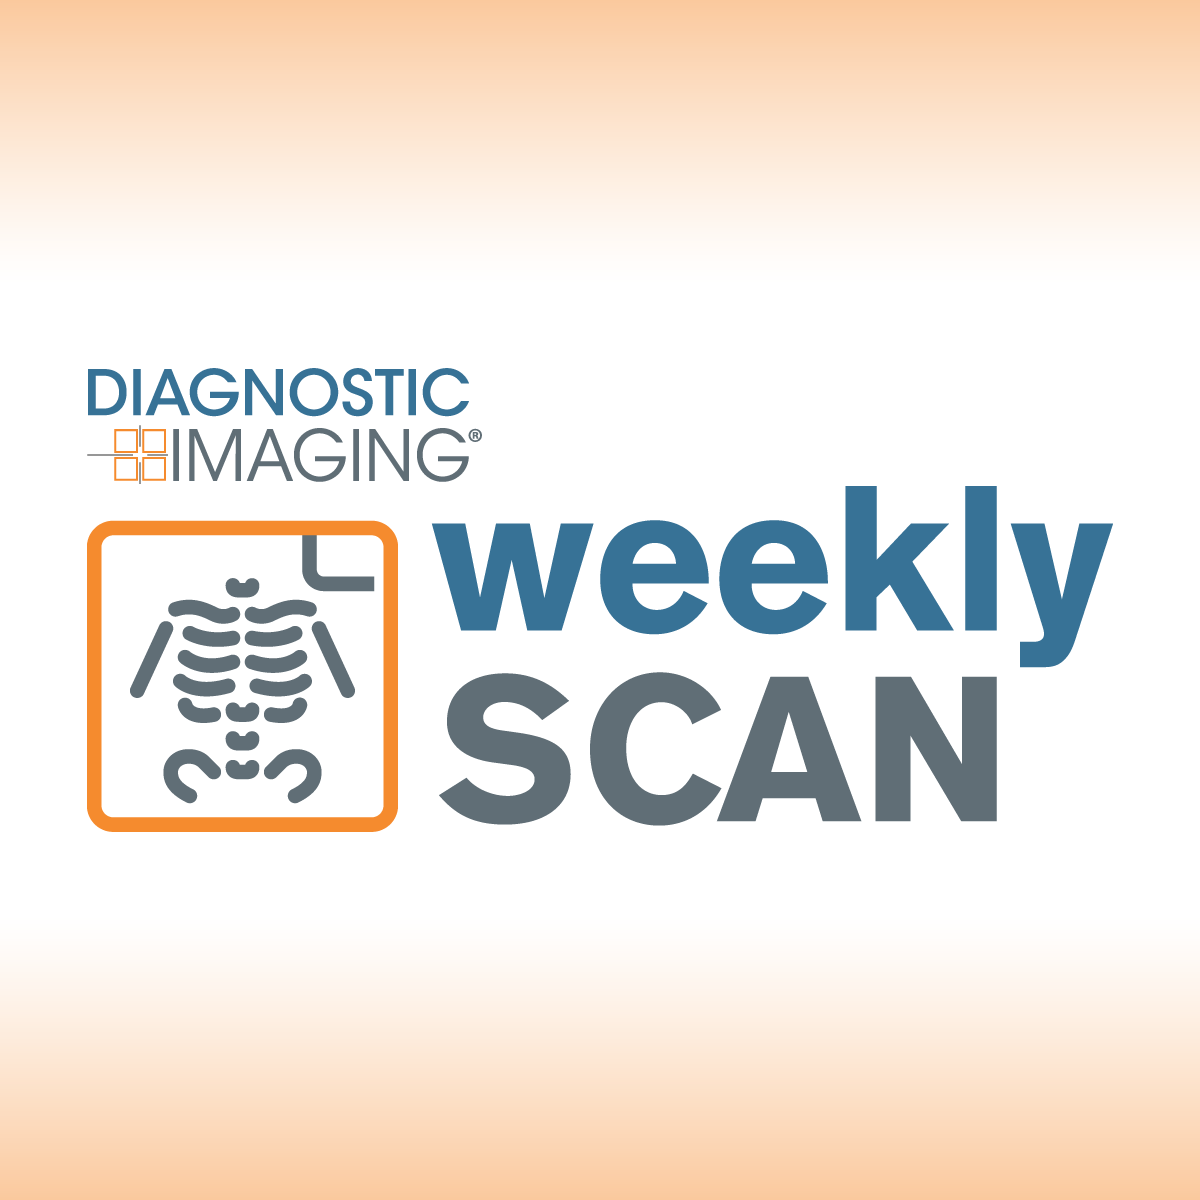 Diagnostic Imaging's Weekly Scan: March 31-April 6